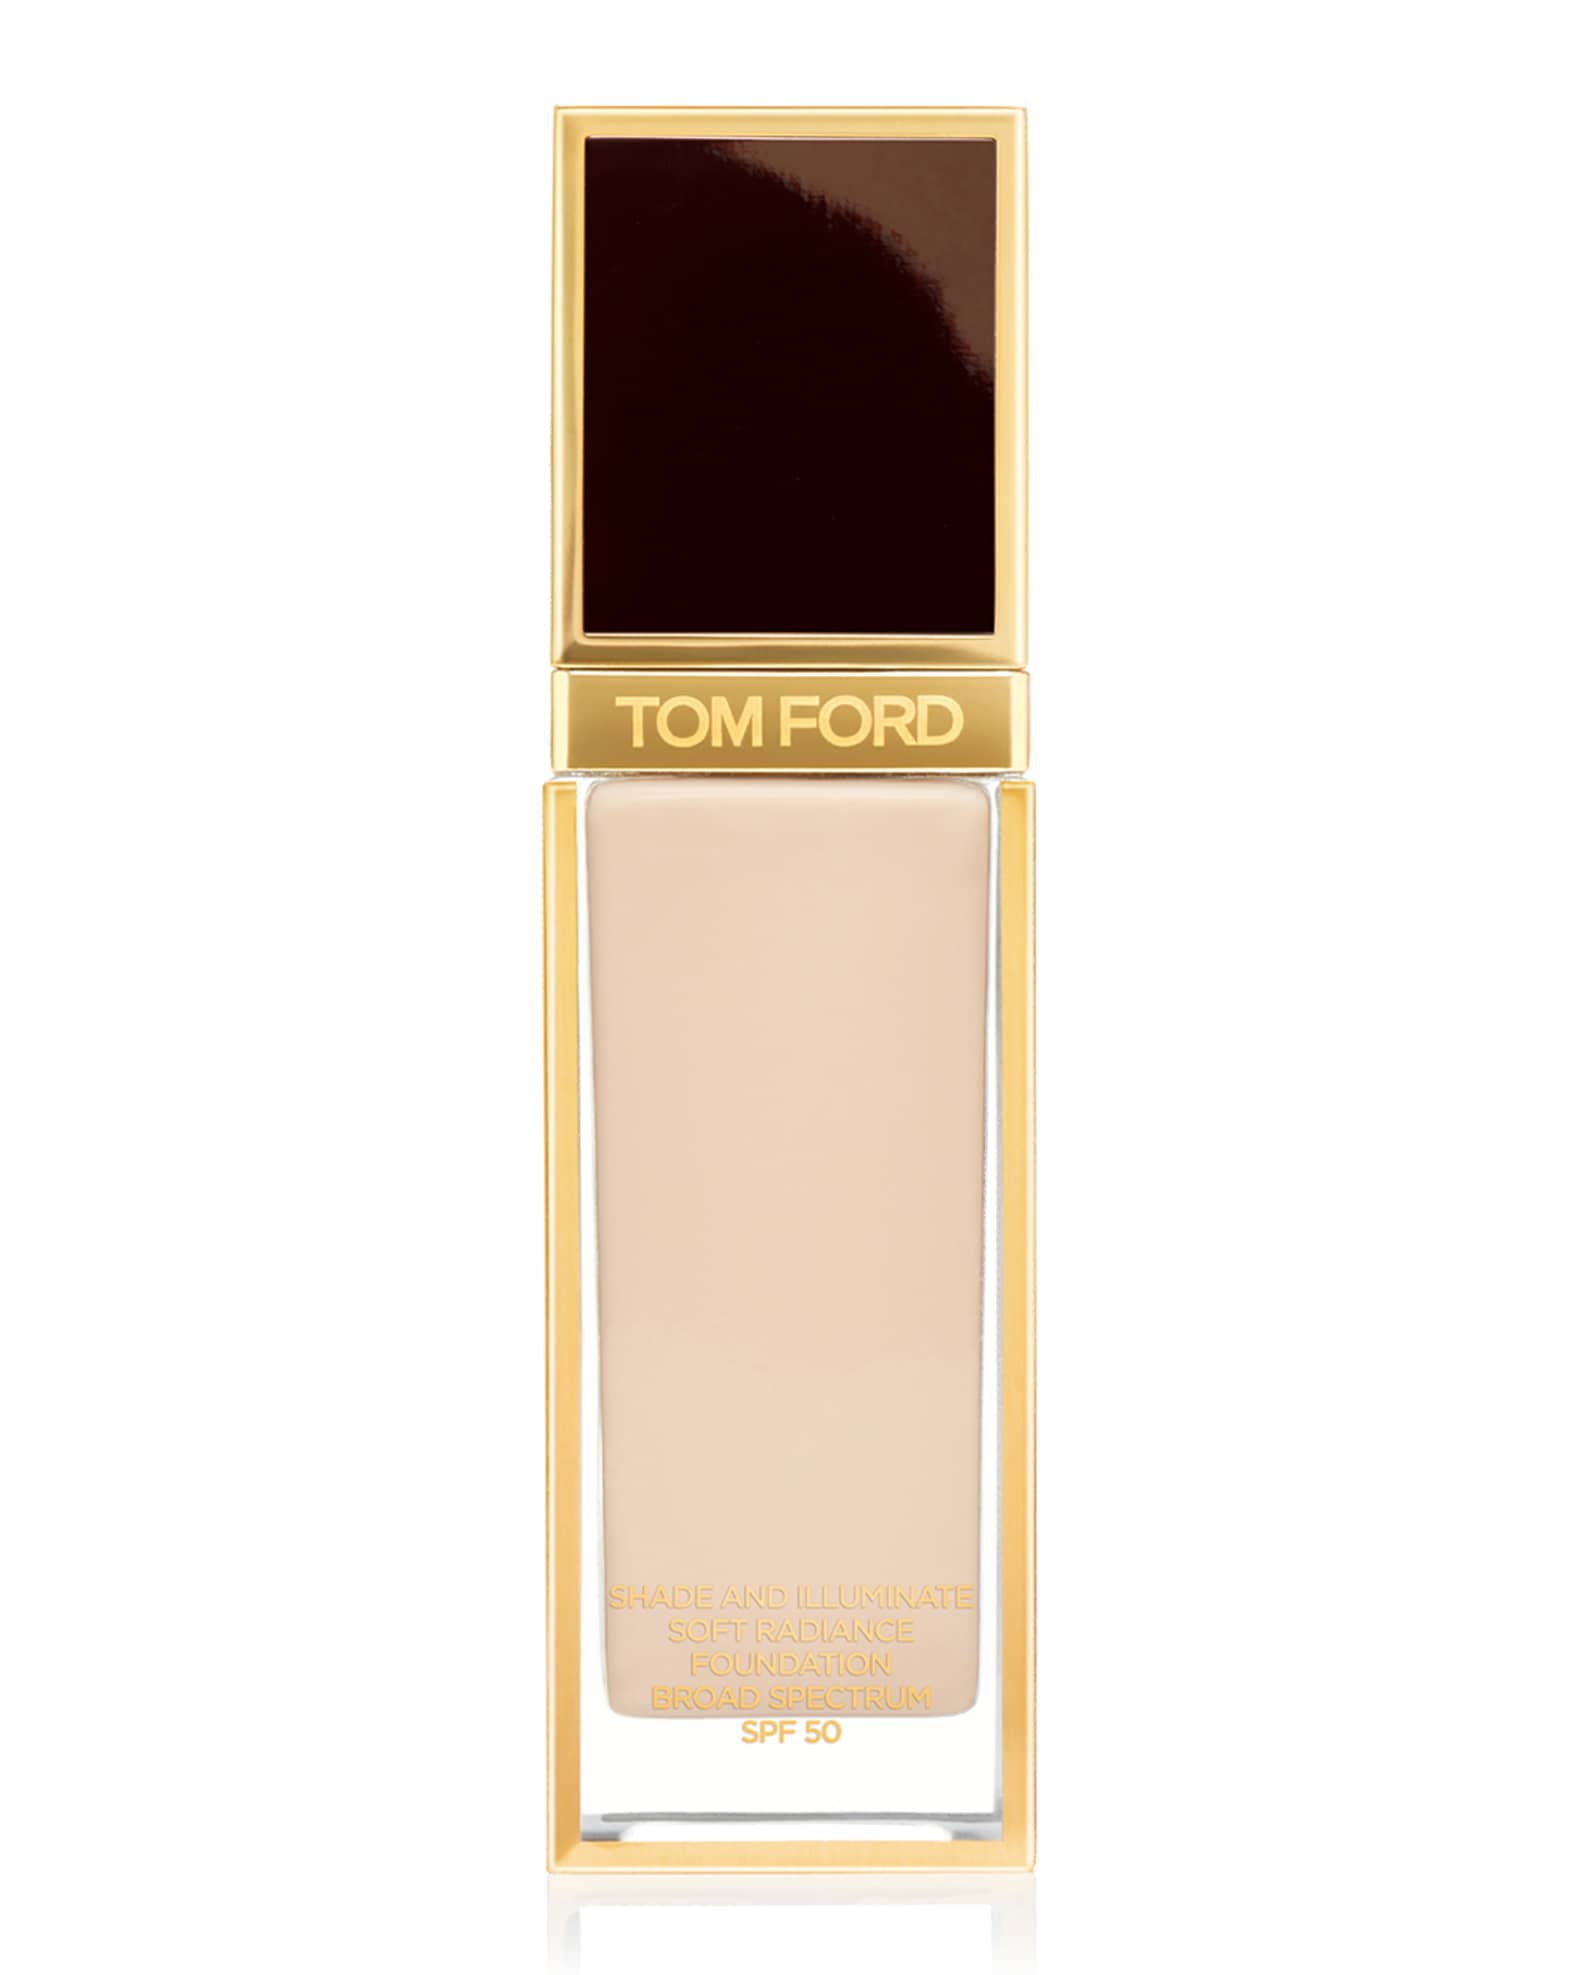 Estee Lauder Tom Ford Collection The Face Gloss Face Illuminator - Amber  Nude